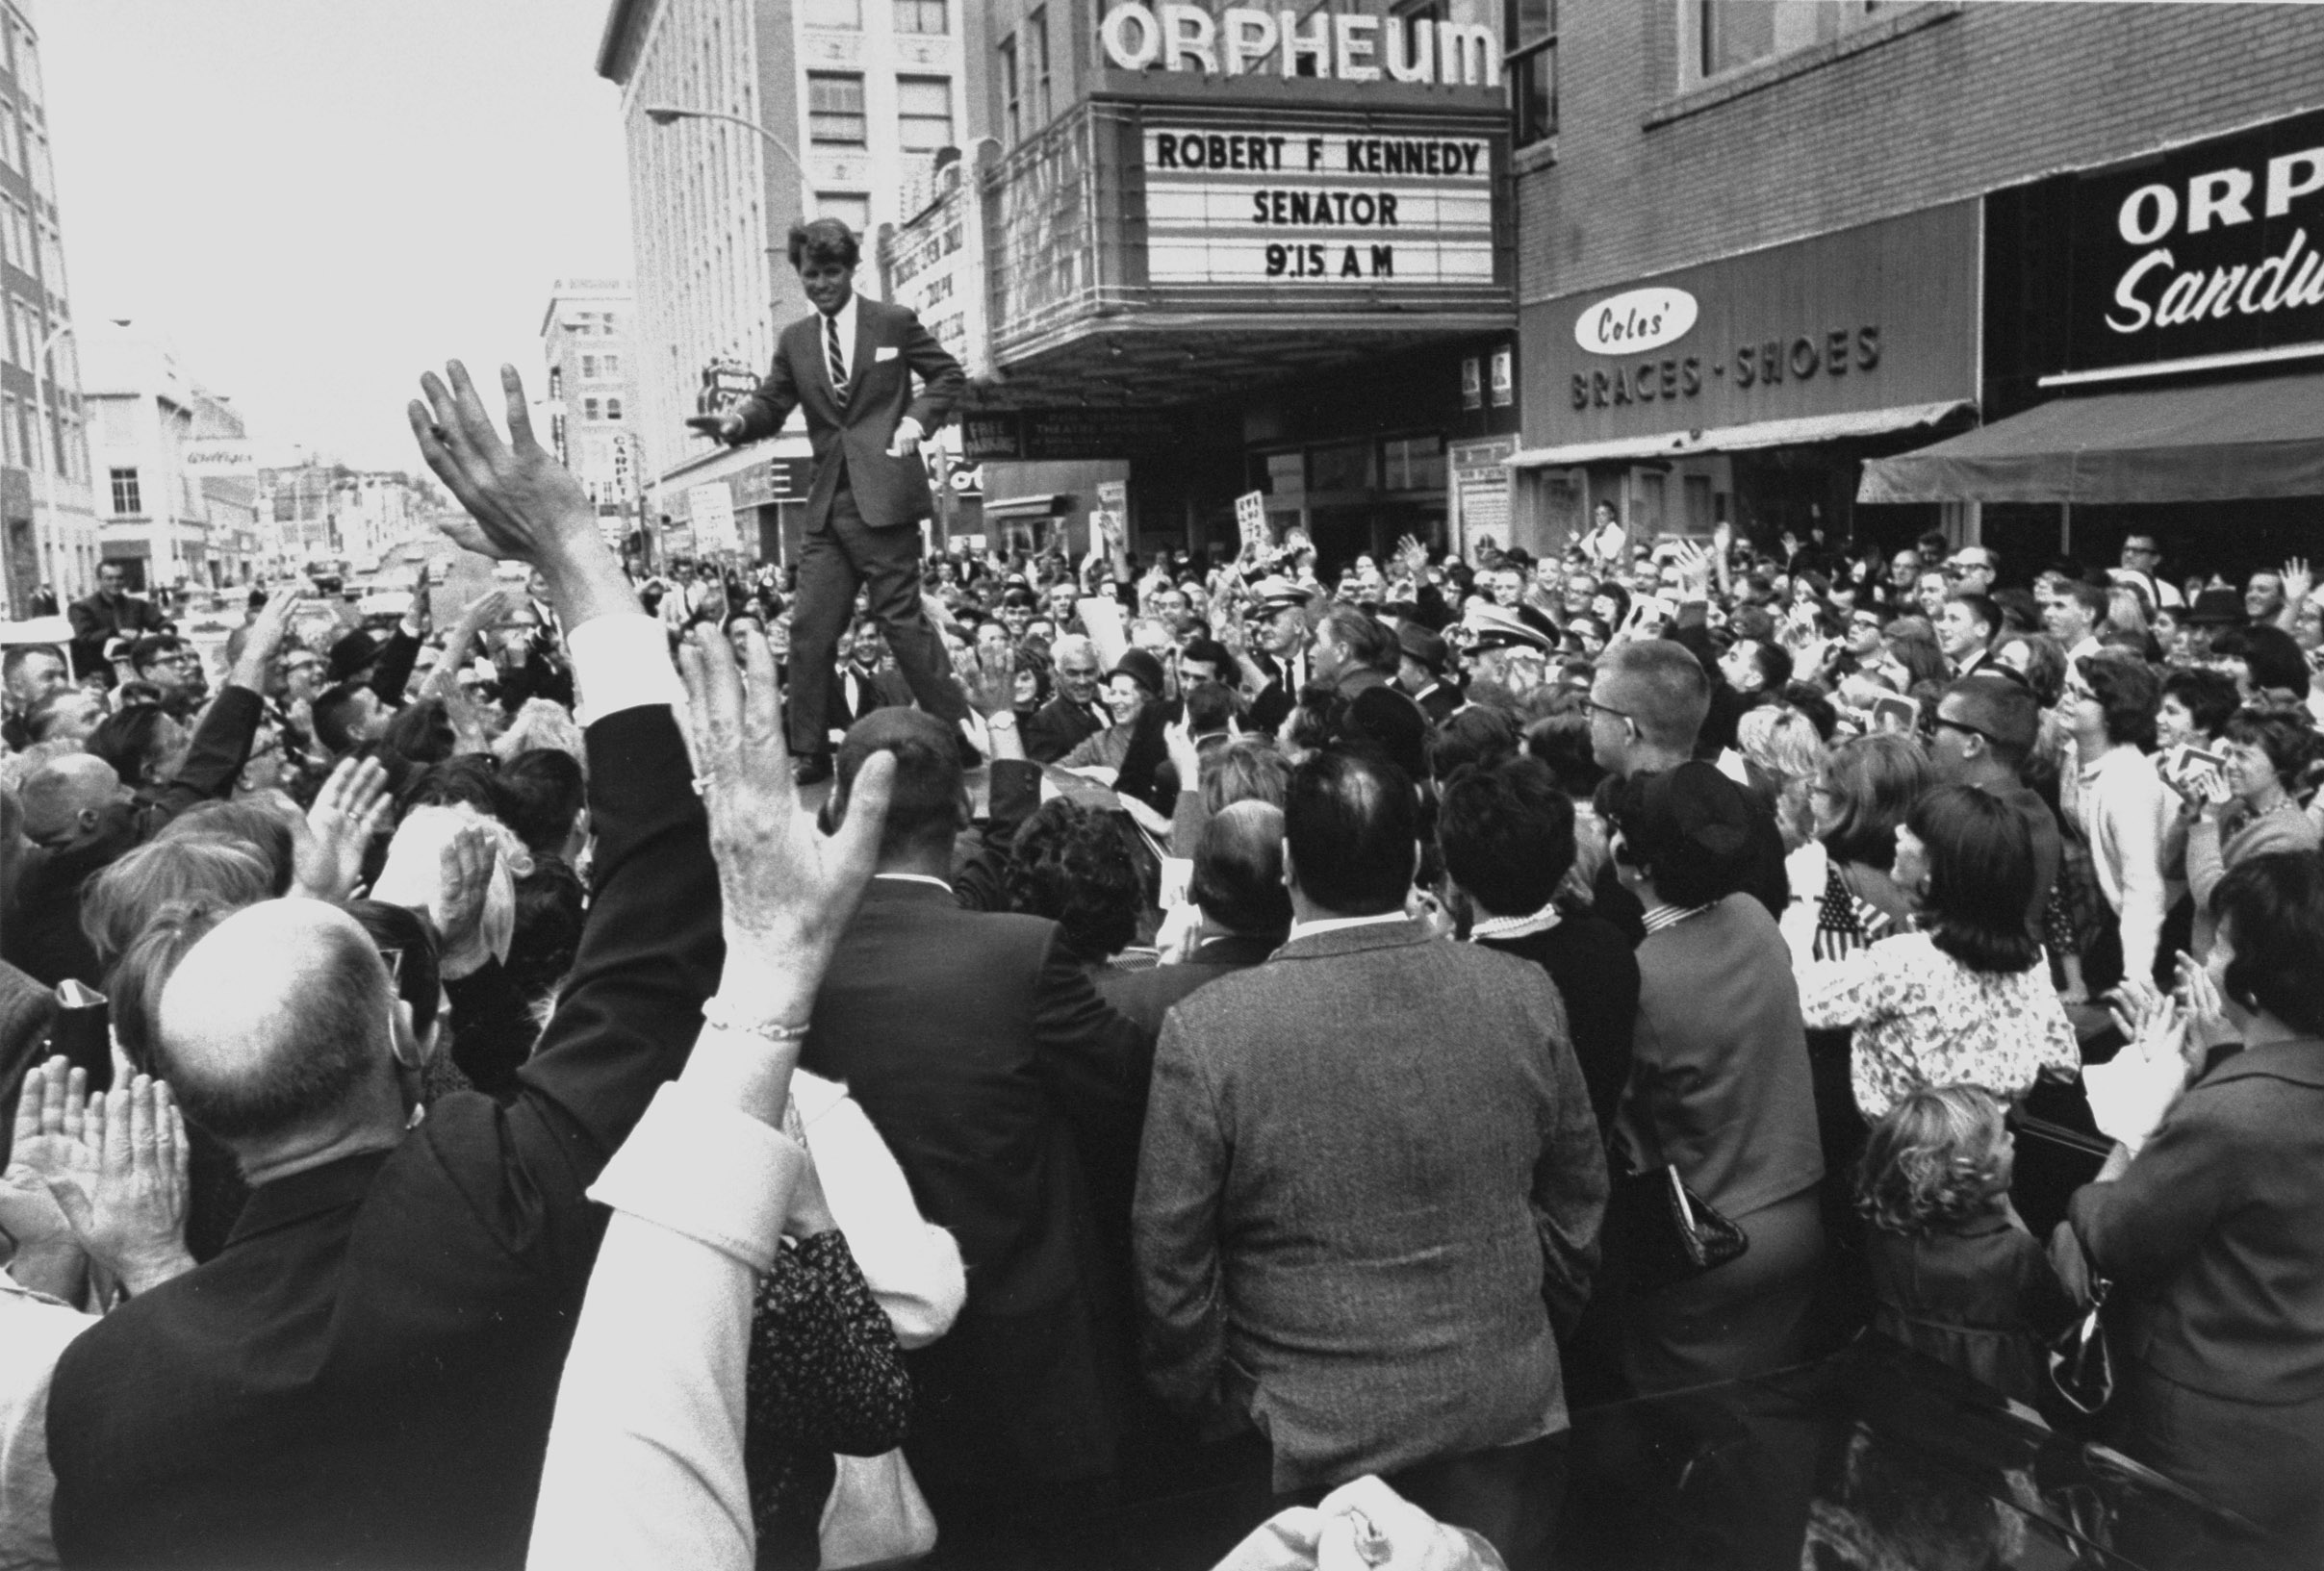 PHOTO: Sen. Robert Kennedy standing on roof of car as he is swamped by a crowd of welcoming well-wishers while campaigning for a local democratic congressional candidate, in Sioux City, 1966.